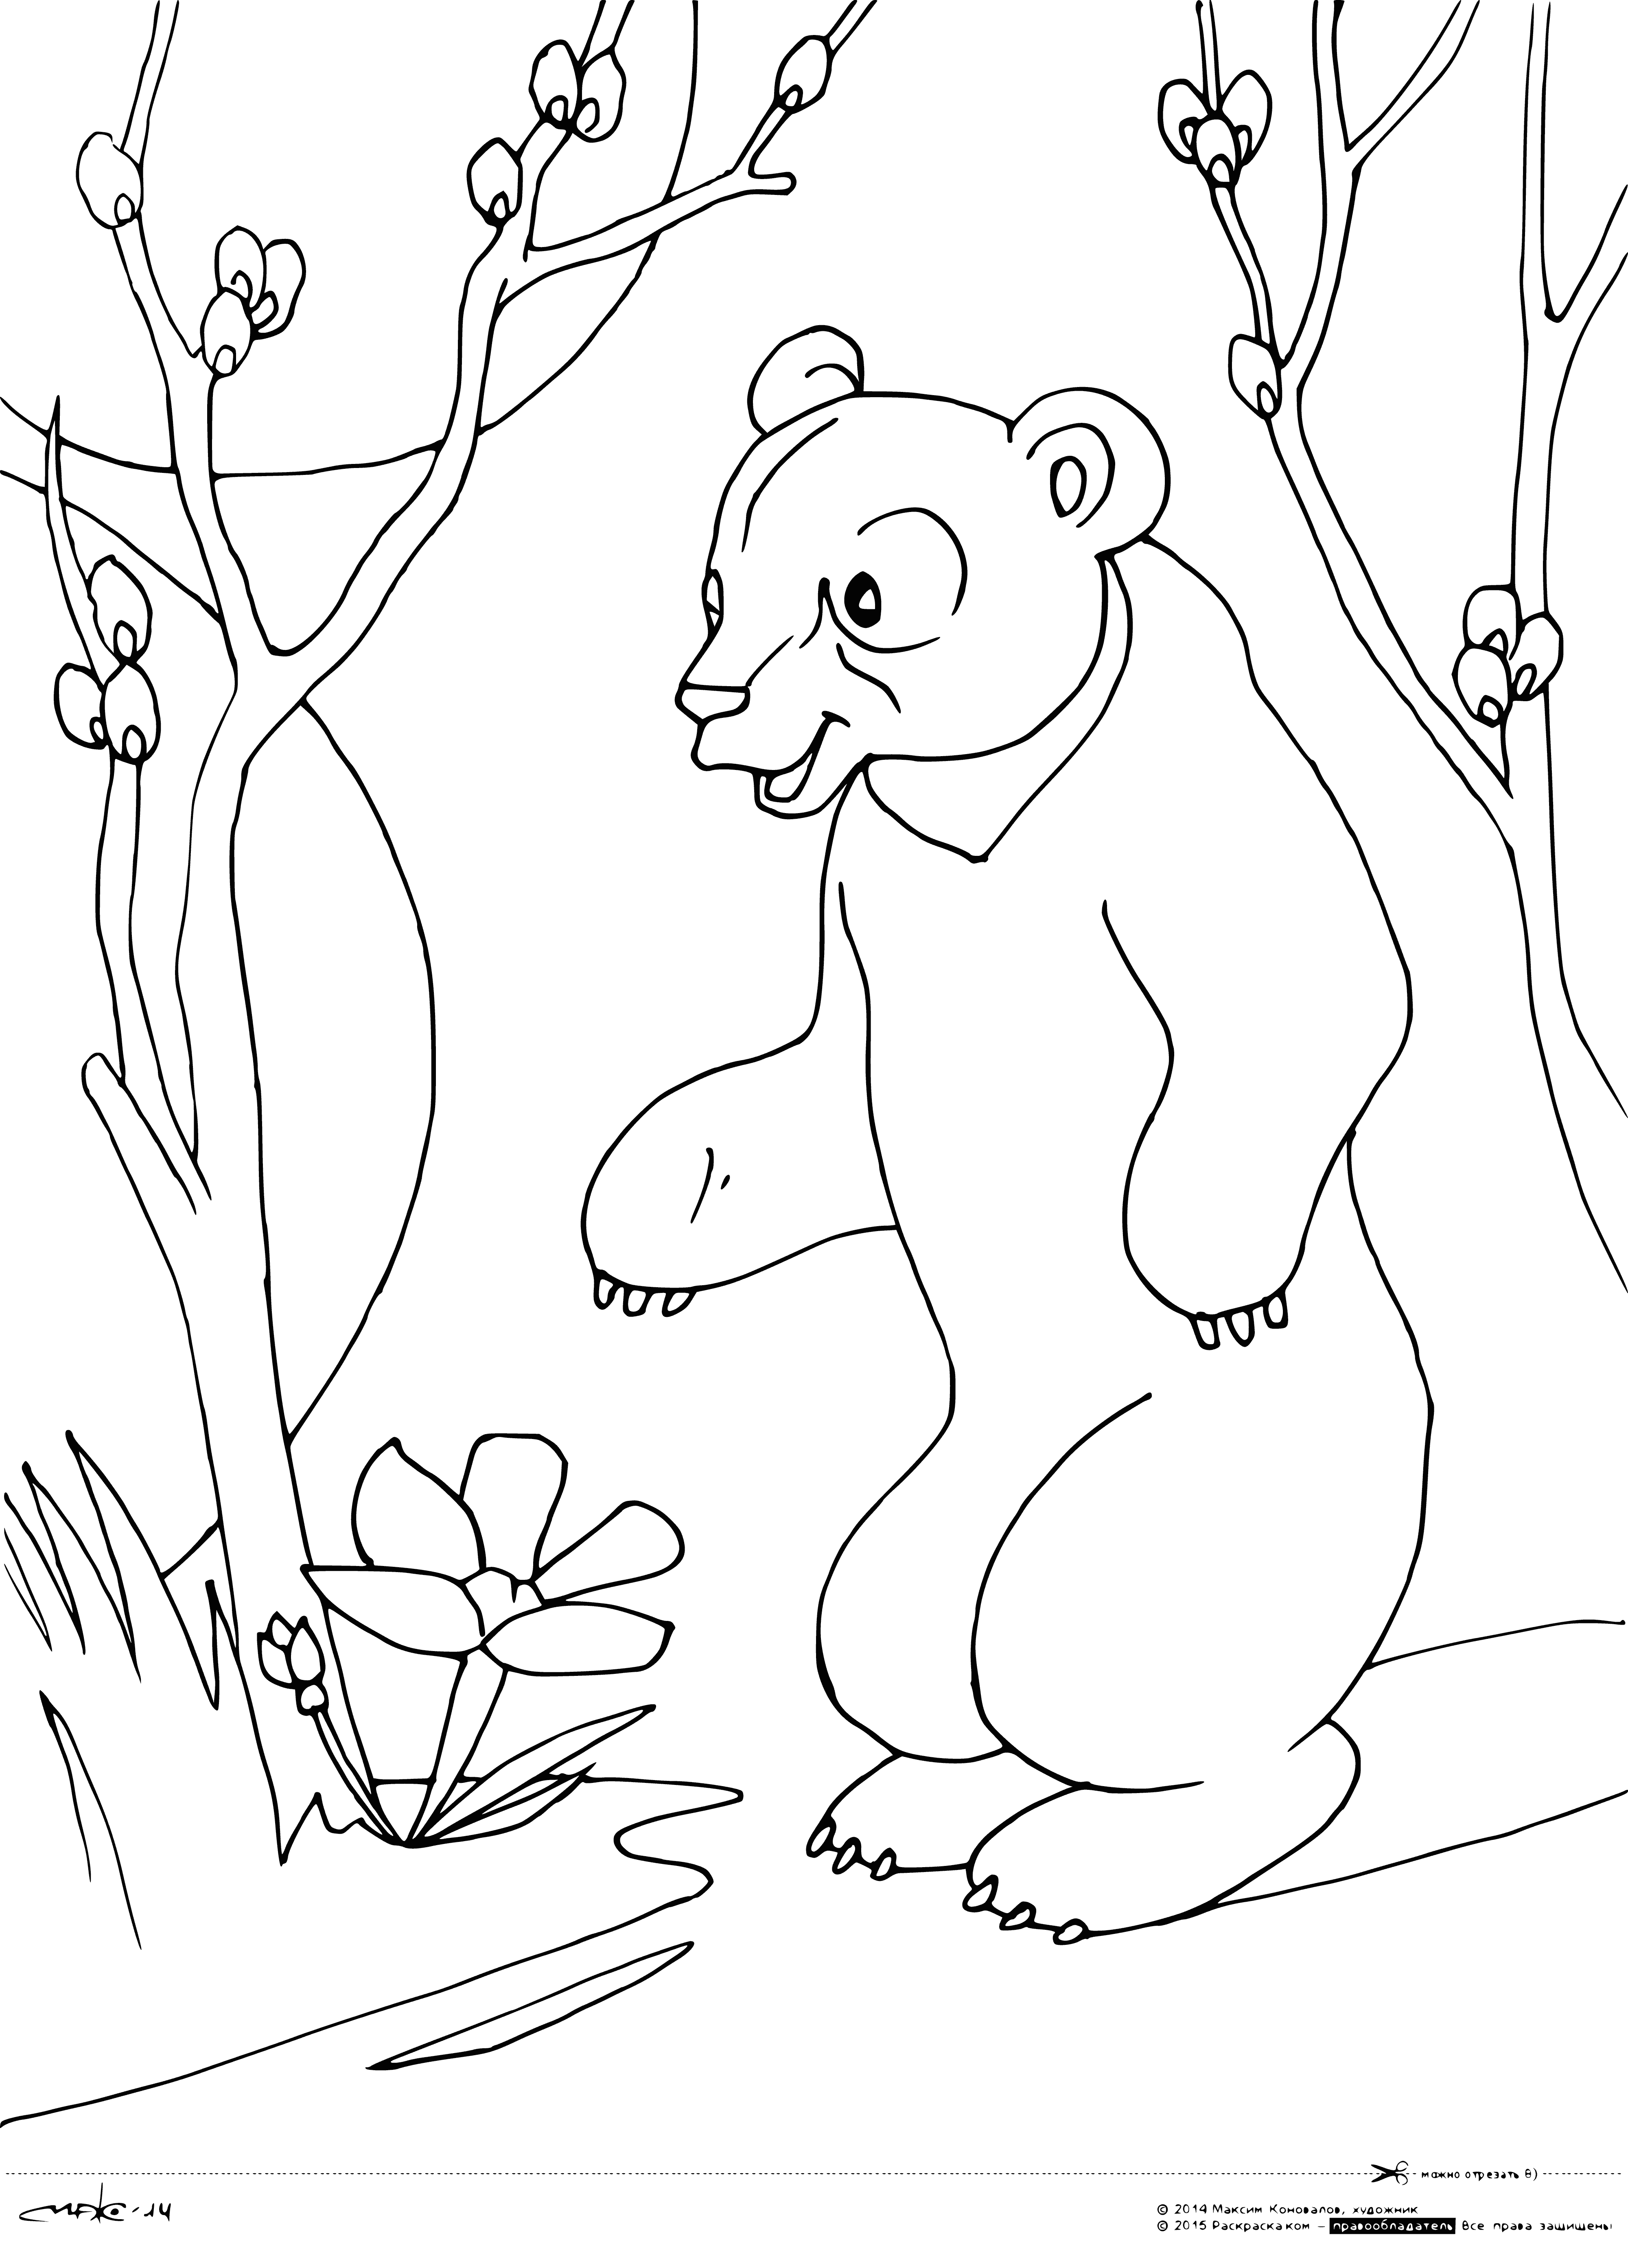 First flowers coloring page